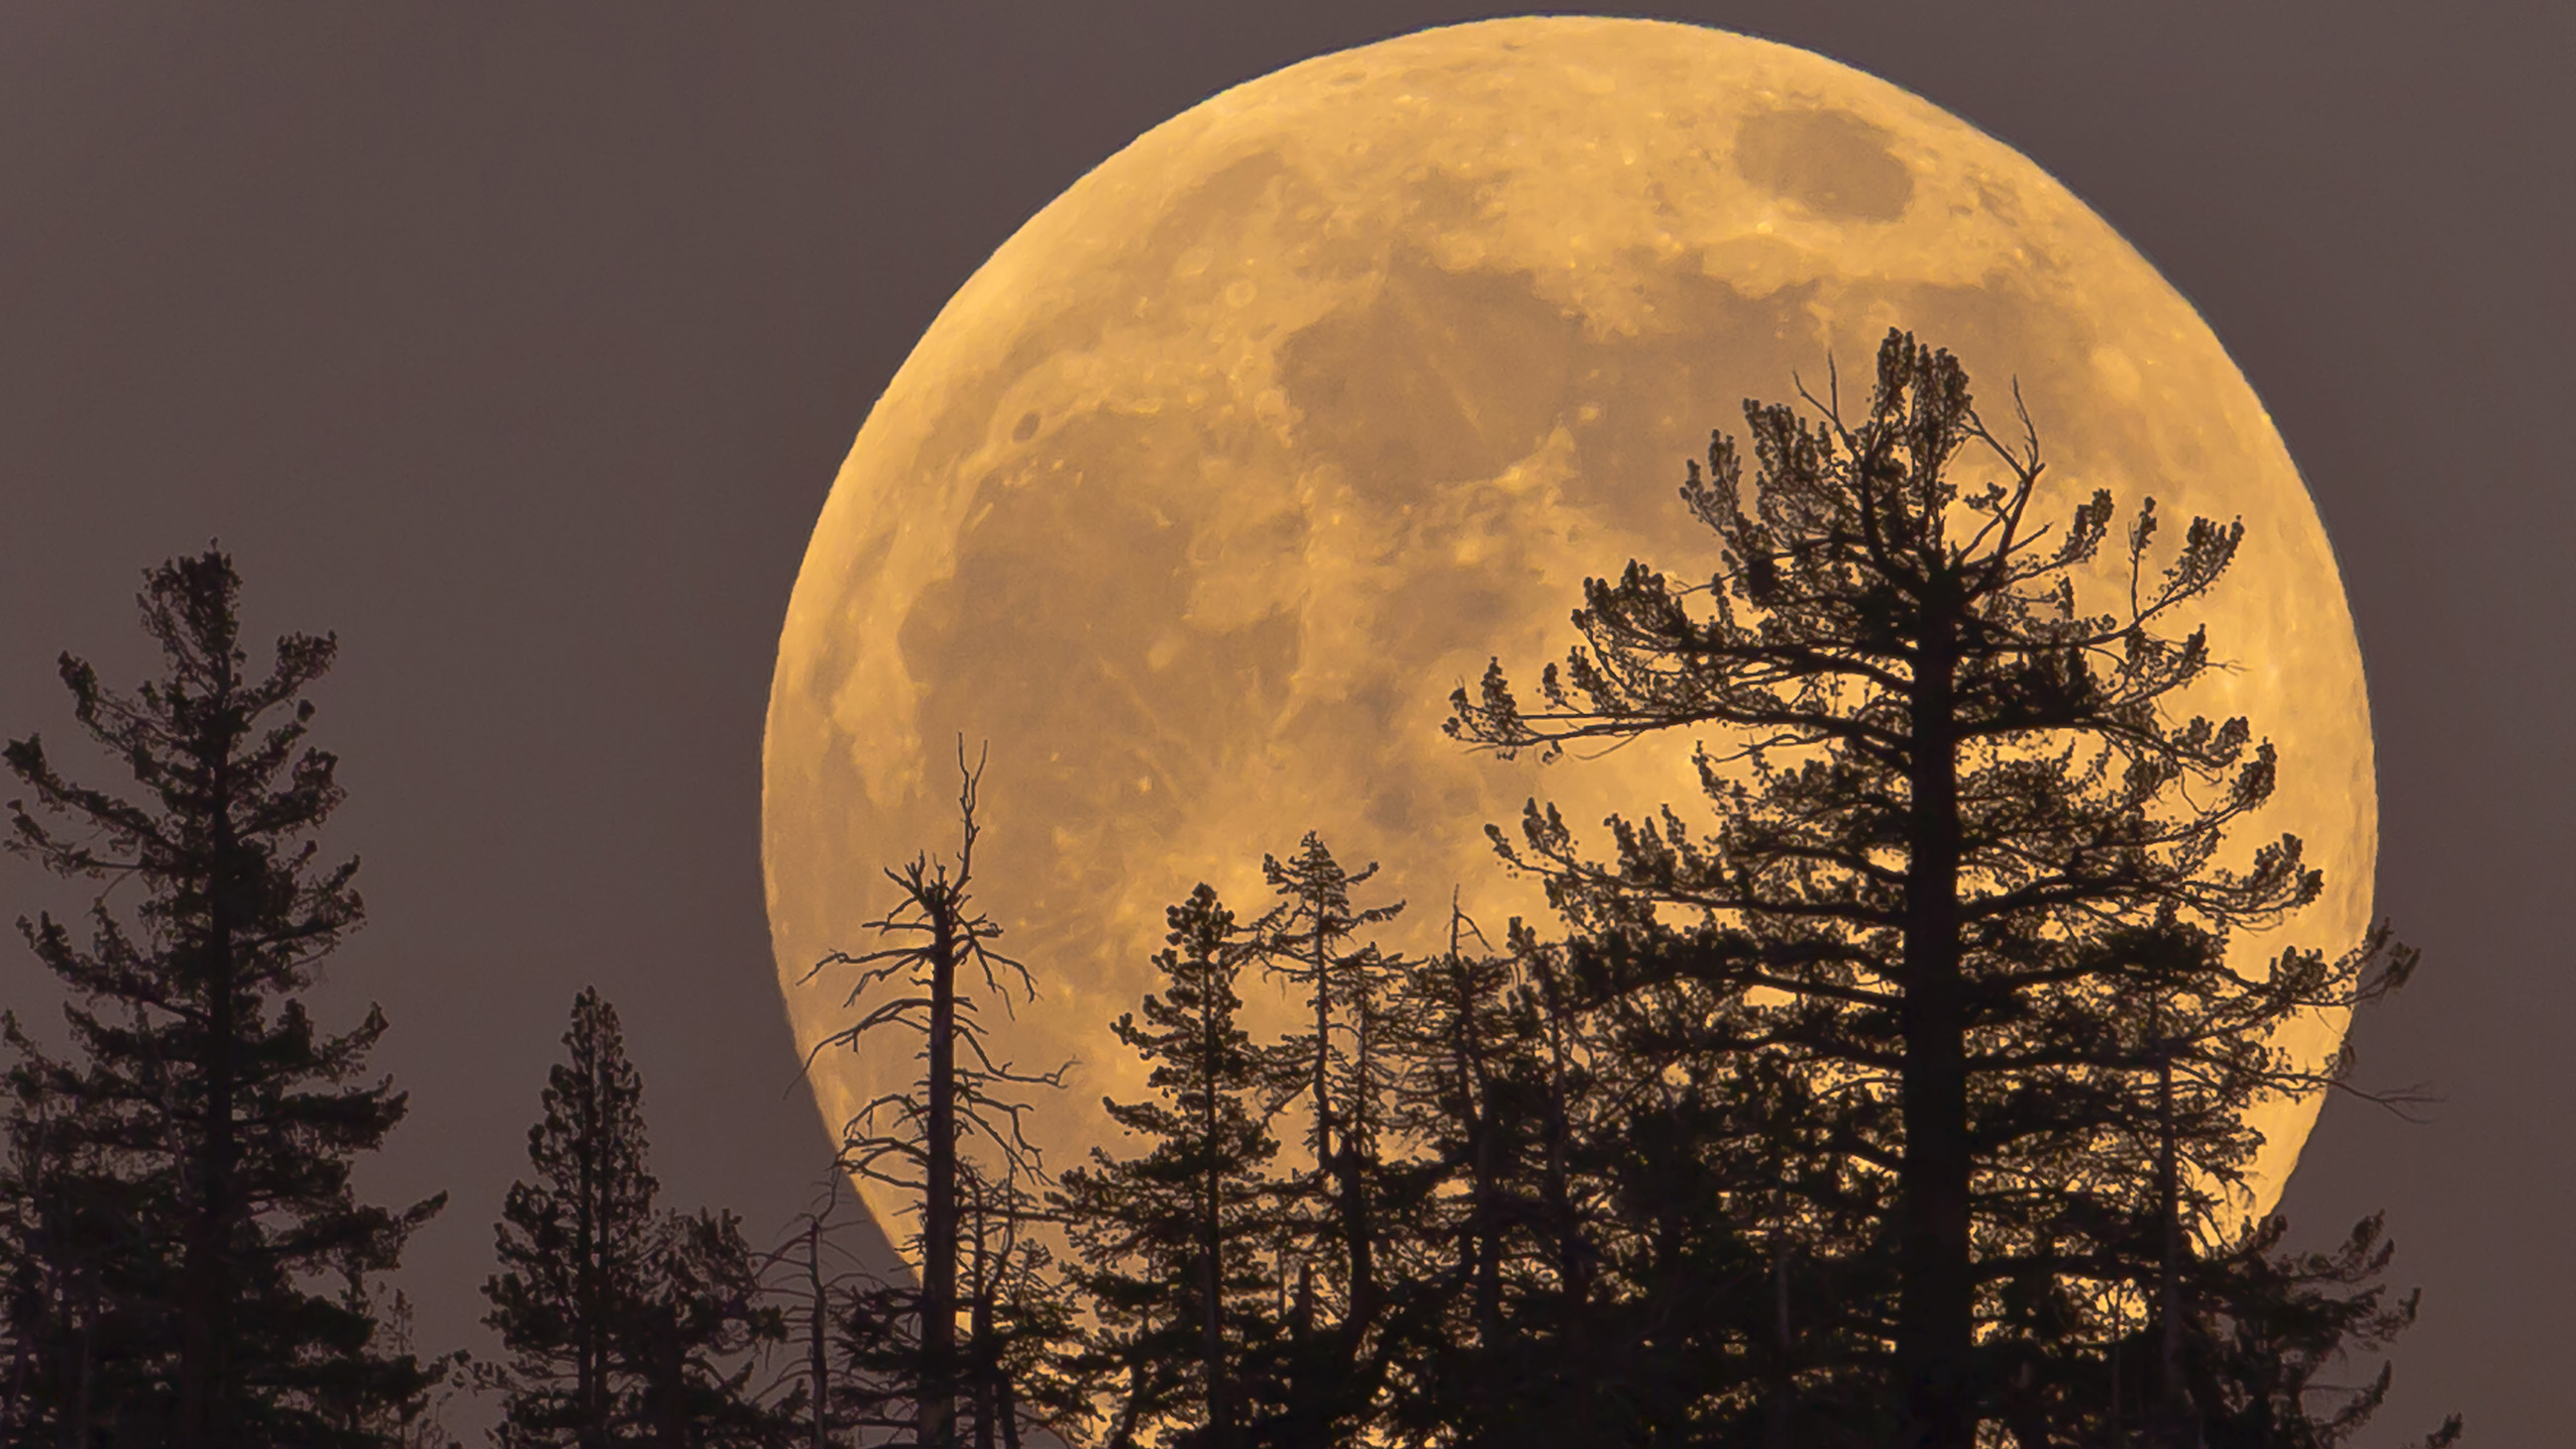 A super-sized "supermoon" will appear next Monday. This and other news in our twice-weekly news roundup.